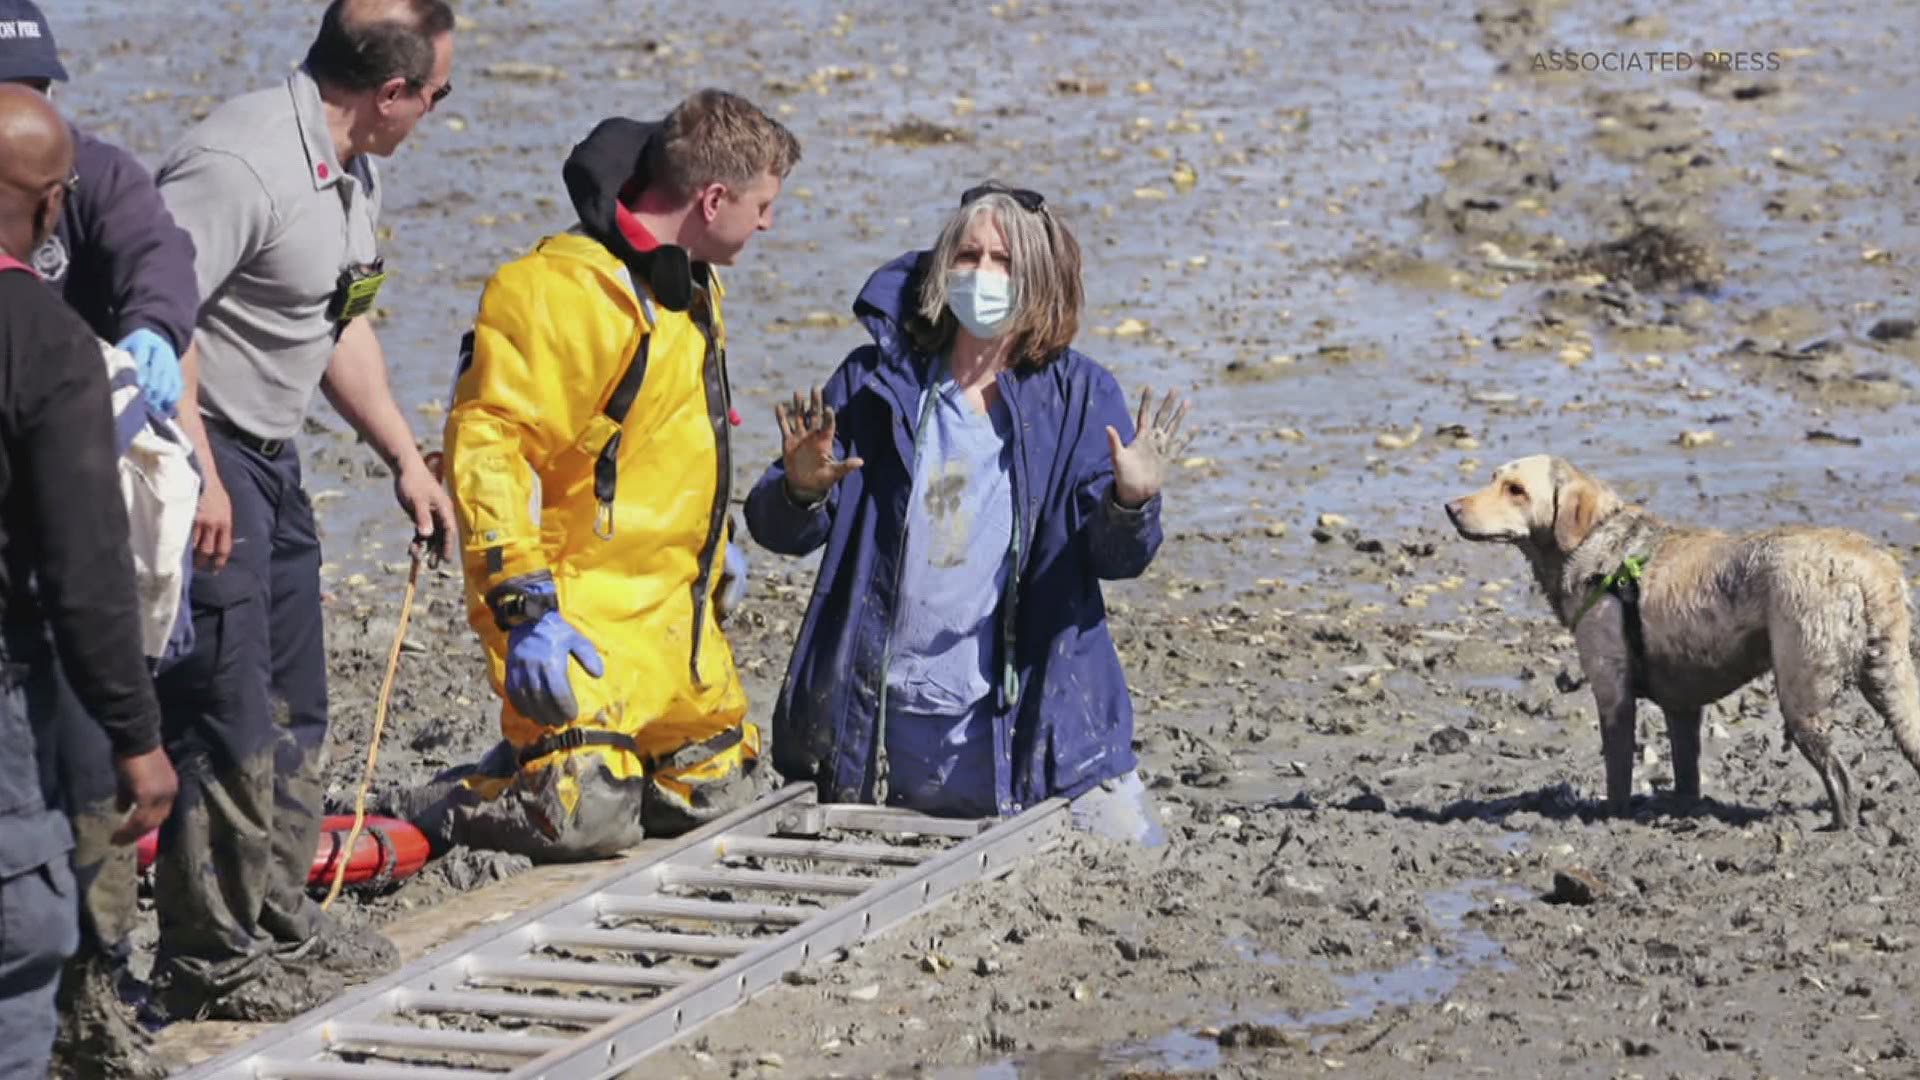 The Boston Herald reports that 54-year-old Camille Coelho had to be rescued by firefighters Thursday after getting stuck to her knees in wet sand.